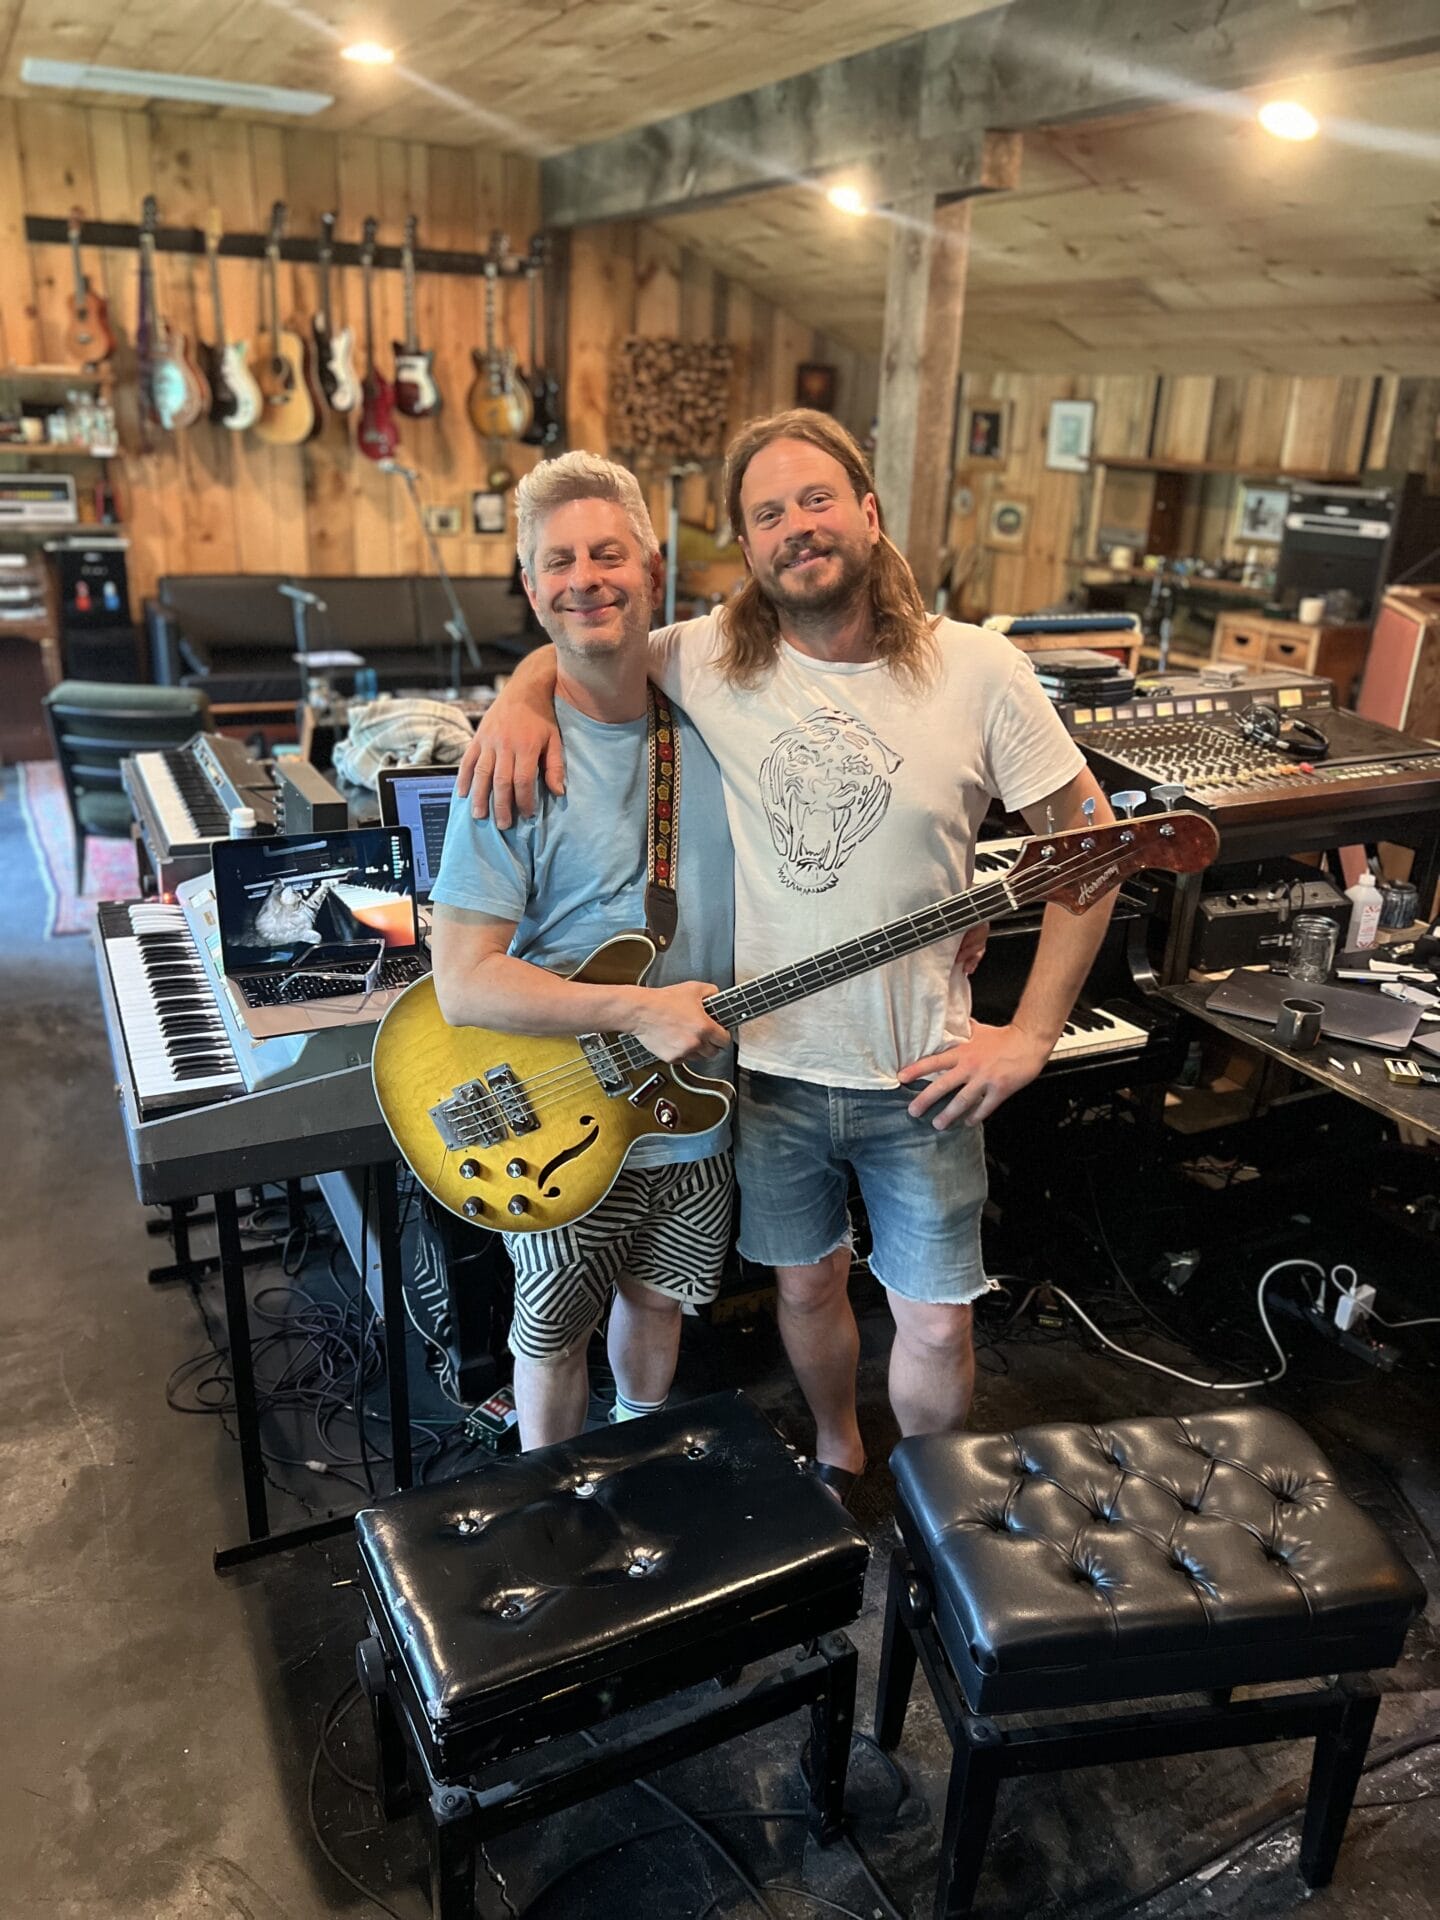 Mike Gordon and Marco Benevento Welcome Sam Cohen, Karina Rykman, Dave Dreiwitz And More at Follow the Arrow Festival